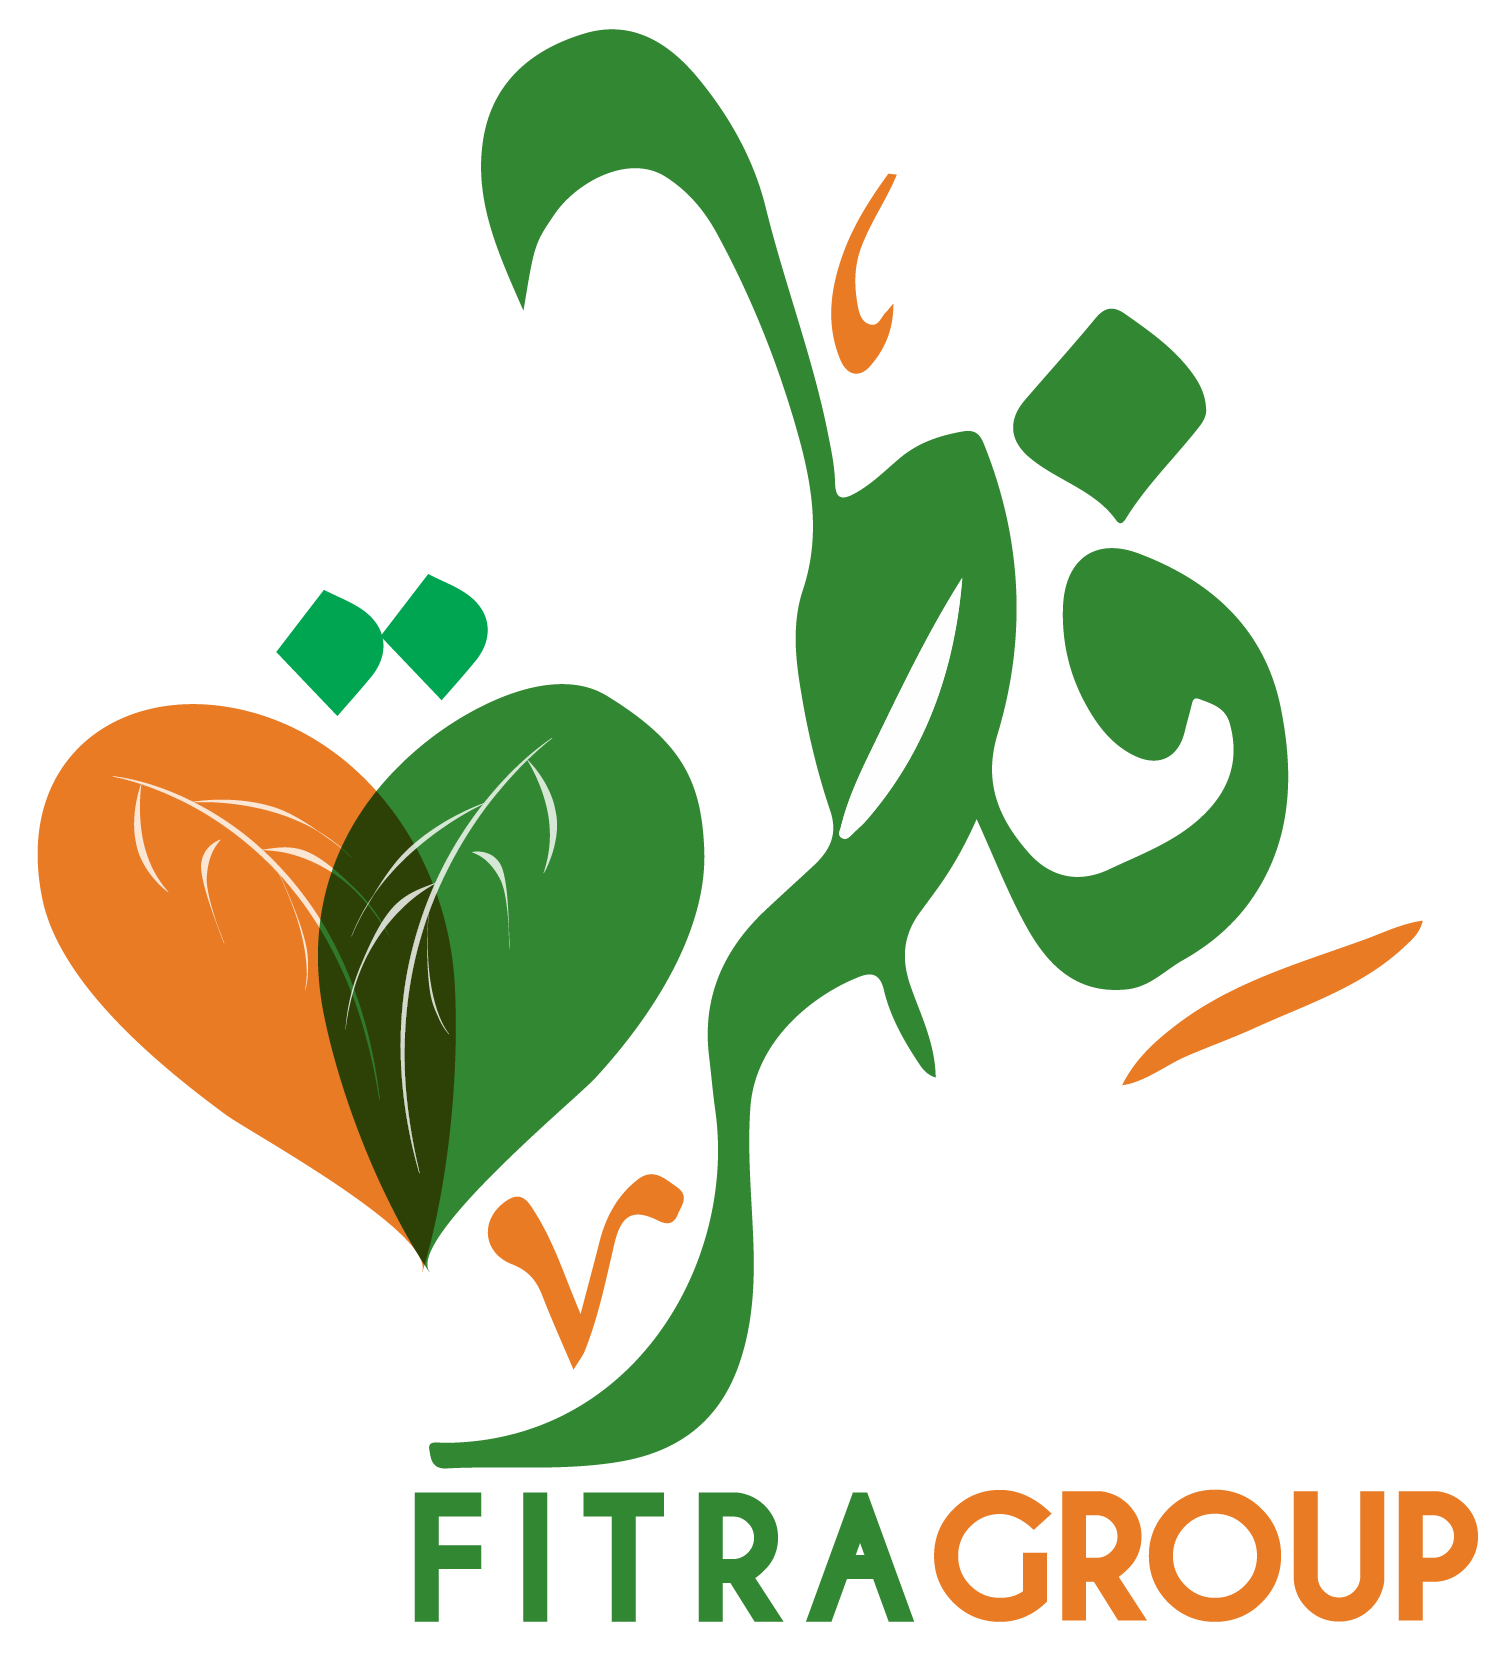 Fitra Group